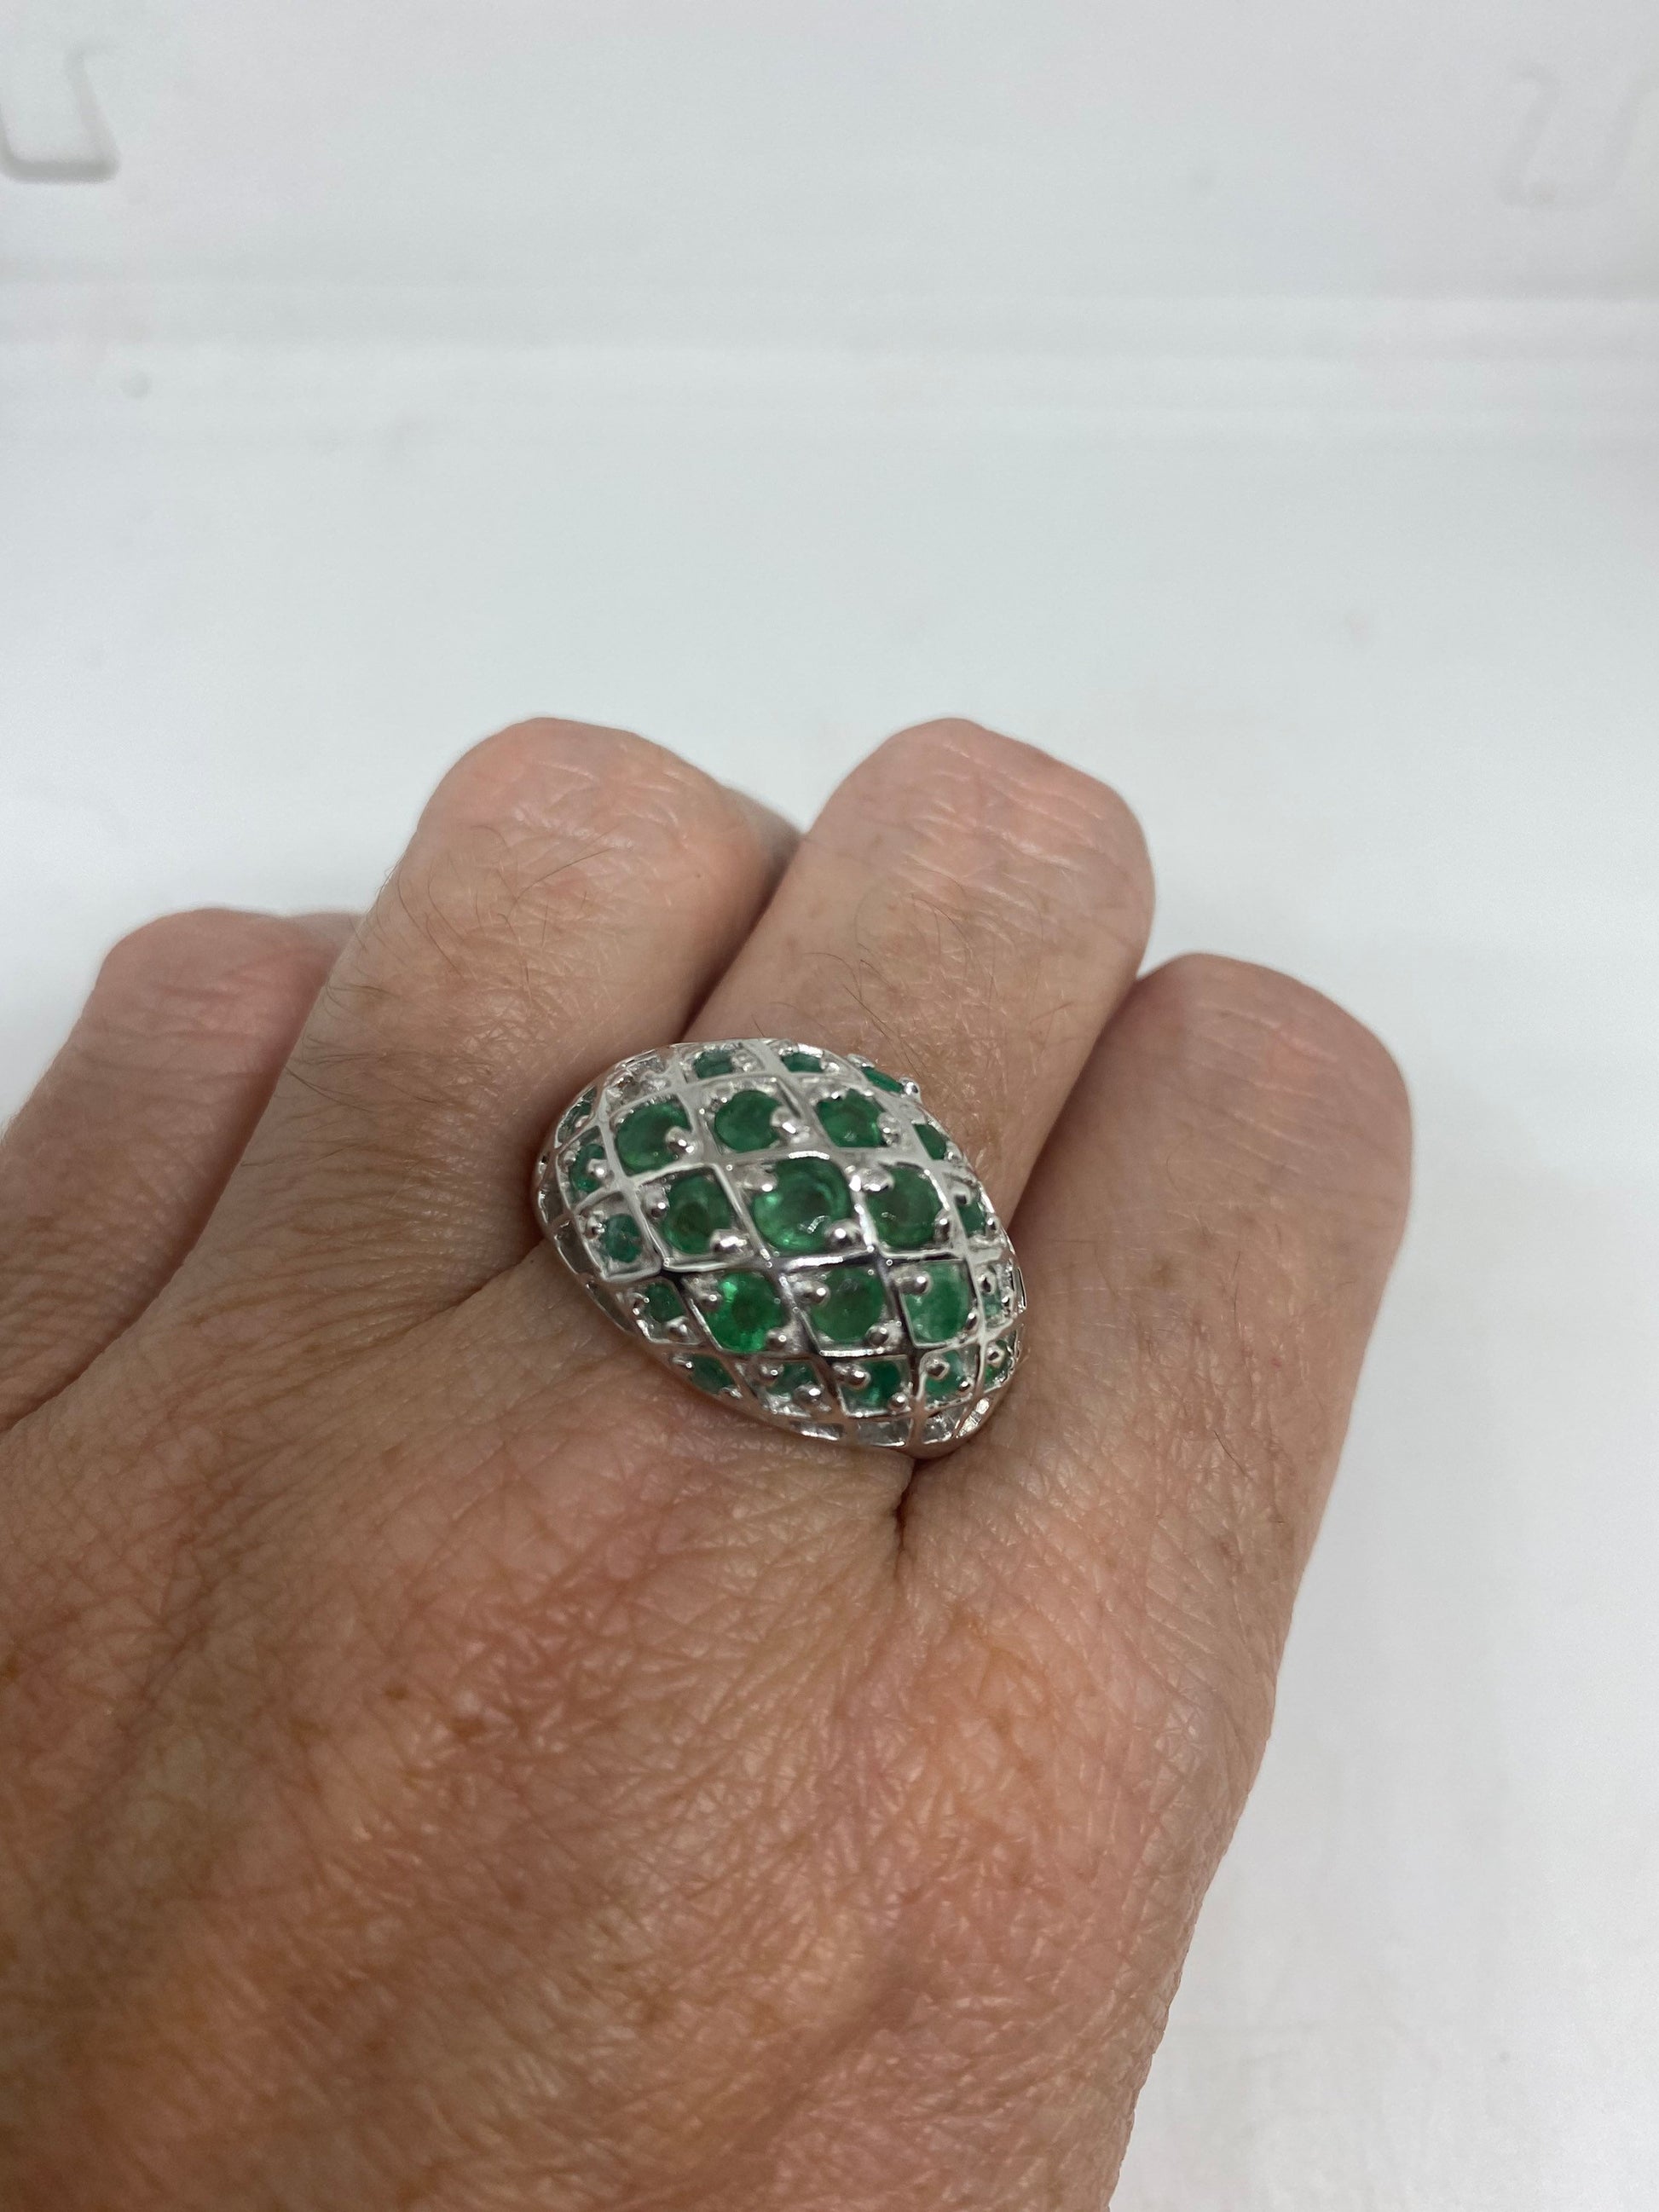 Vintage Green Emerald 925 Sterling Silver Ring Size 10.5